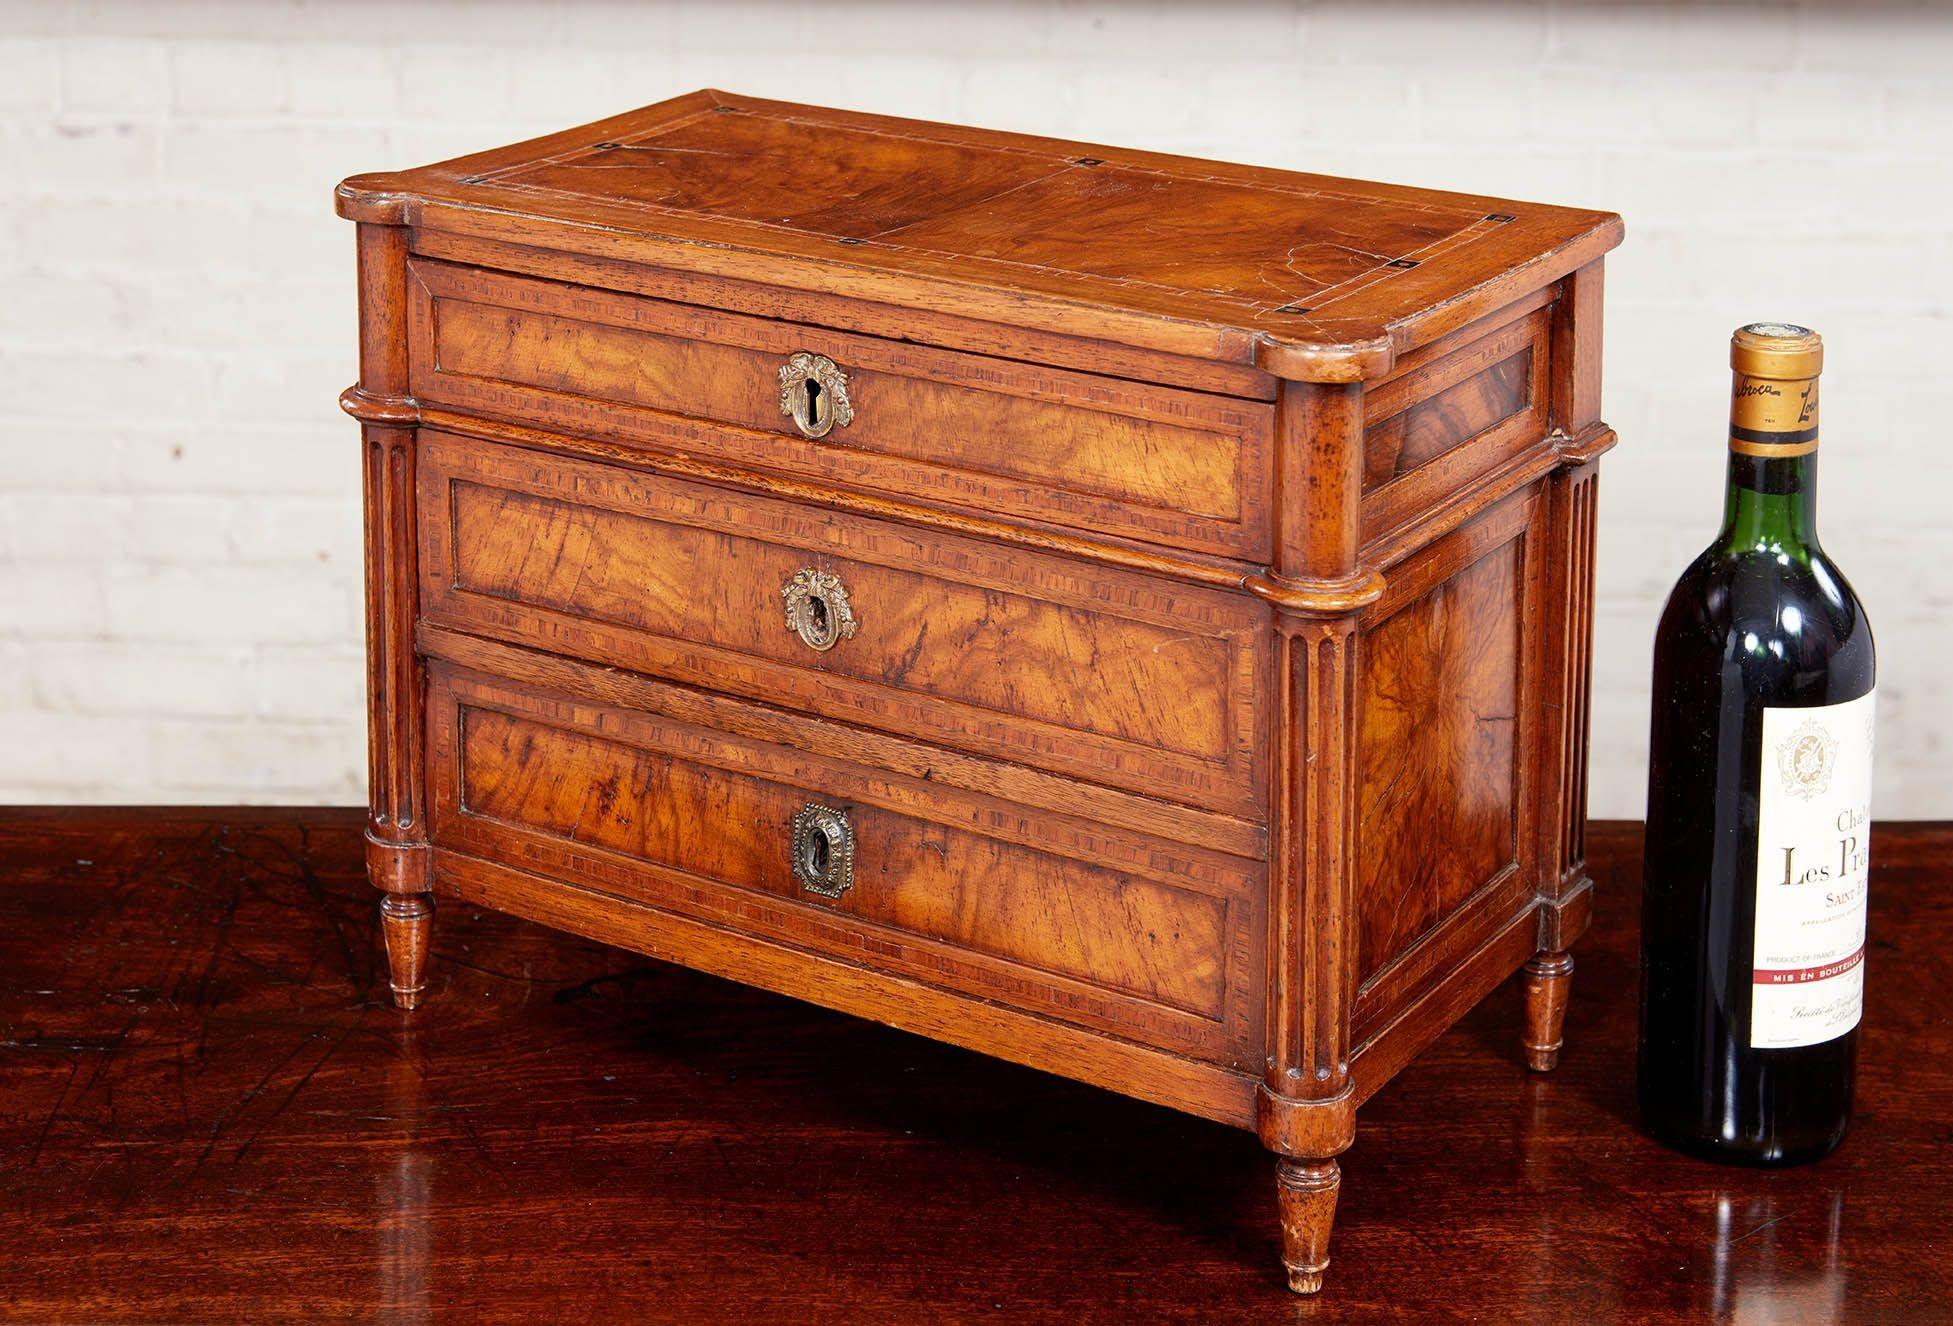 Early 19th Century walnut commode, the inlaid top with cookie corners over turned and fluted legs flanking three inlaid drawers and standing on turned turnip feet, French or Italian circa 1800.